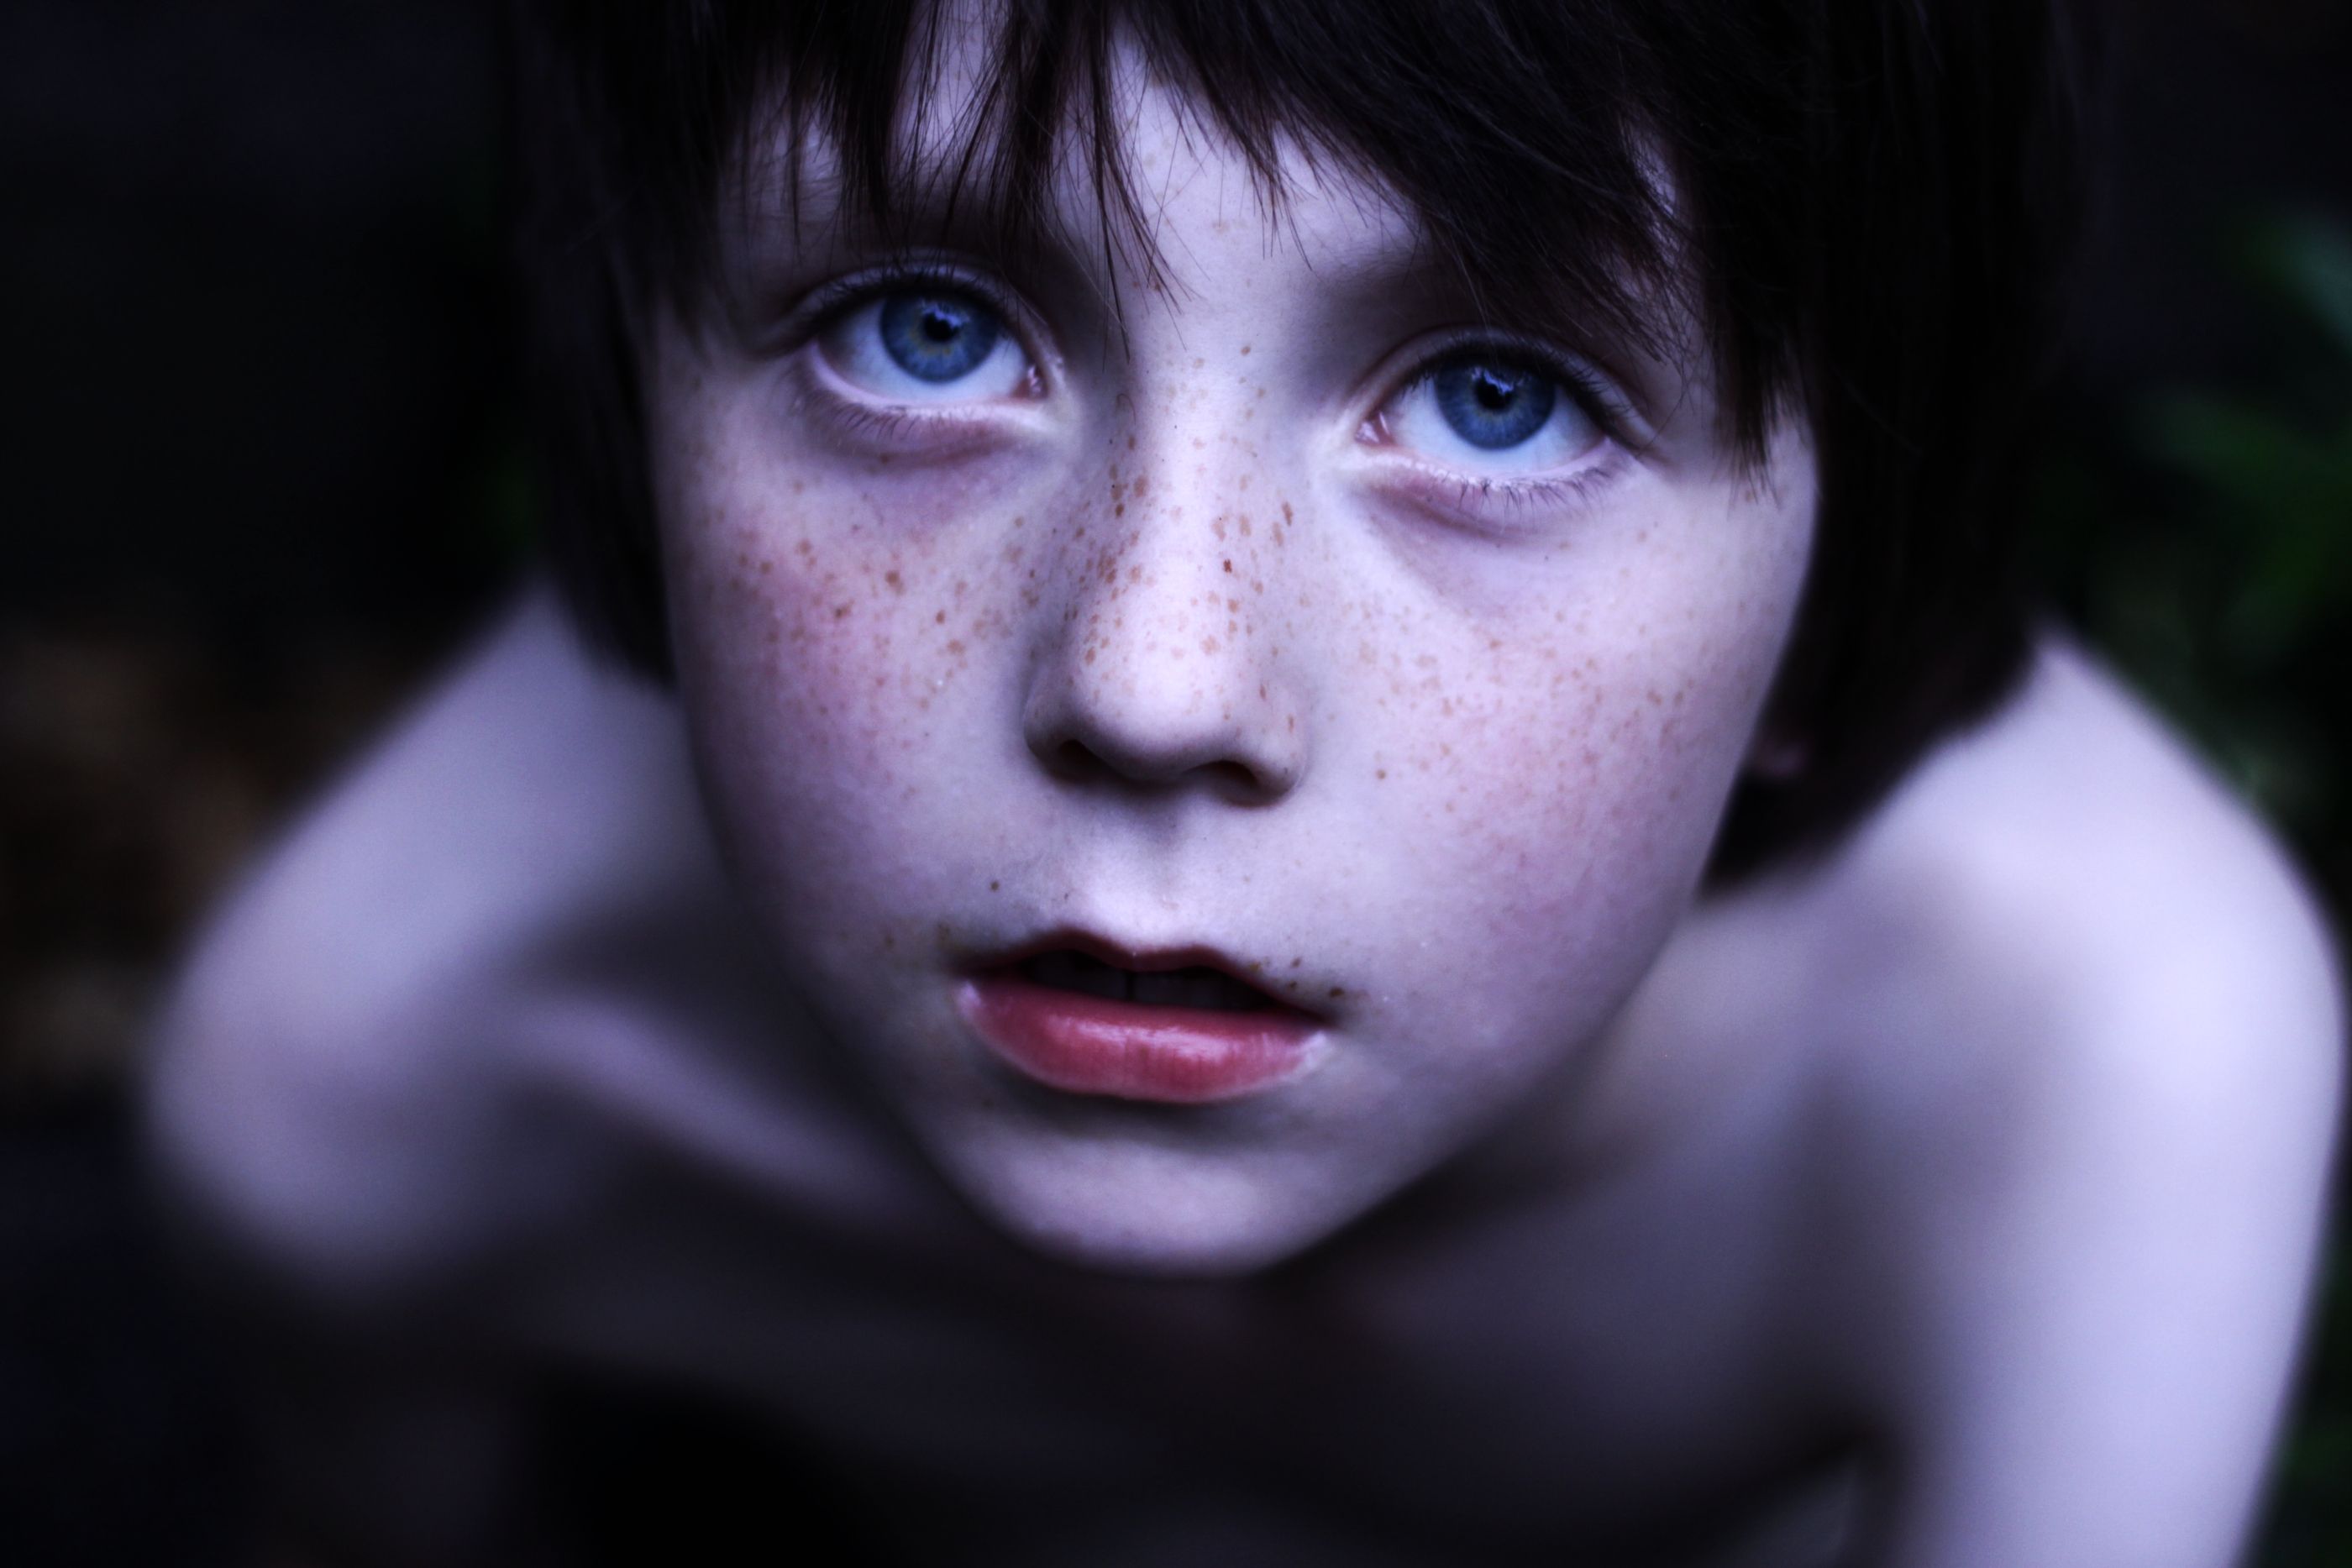 Wallpaper, blue, boy, summer, beautiful, by, digital, Canon, eos, kid, eyes, pretty, child, brother, edited, young, inspired, pale, edward, Eddie, freckles, sibling, 500d, nirrimi, ofcabbagesandkings, whiterosesred 2800x1867 - Wallpaper